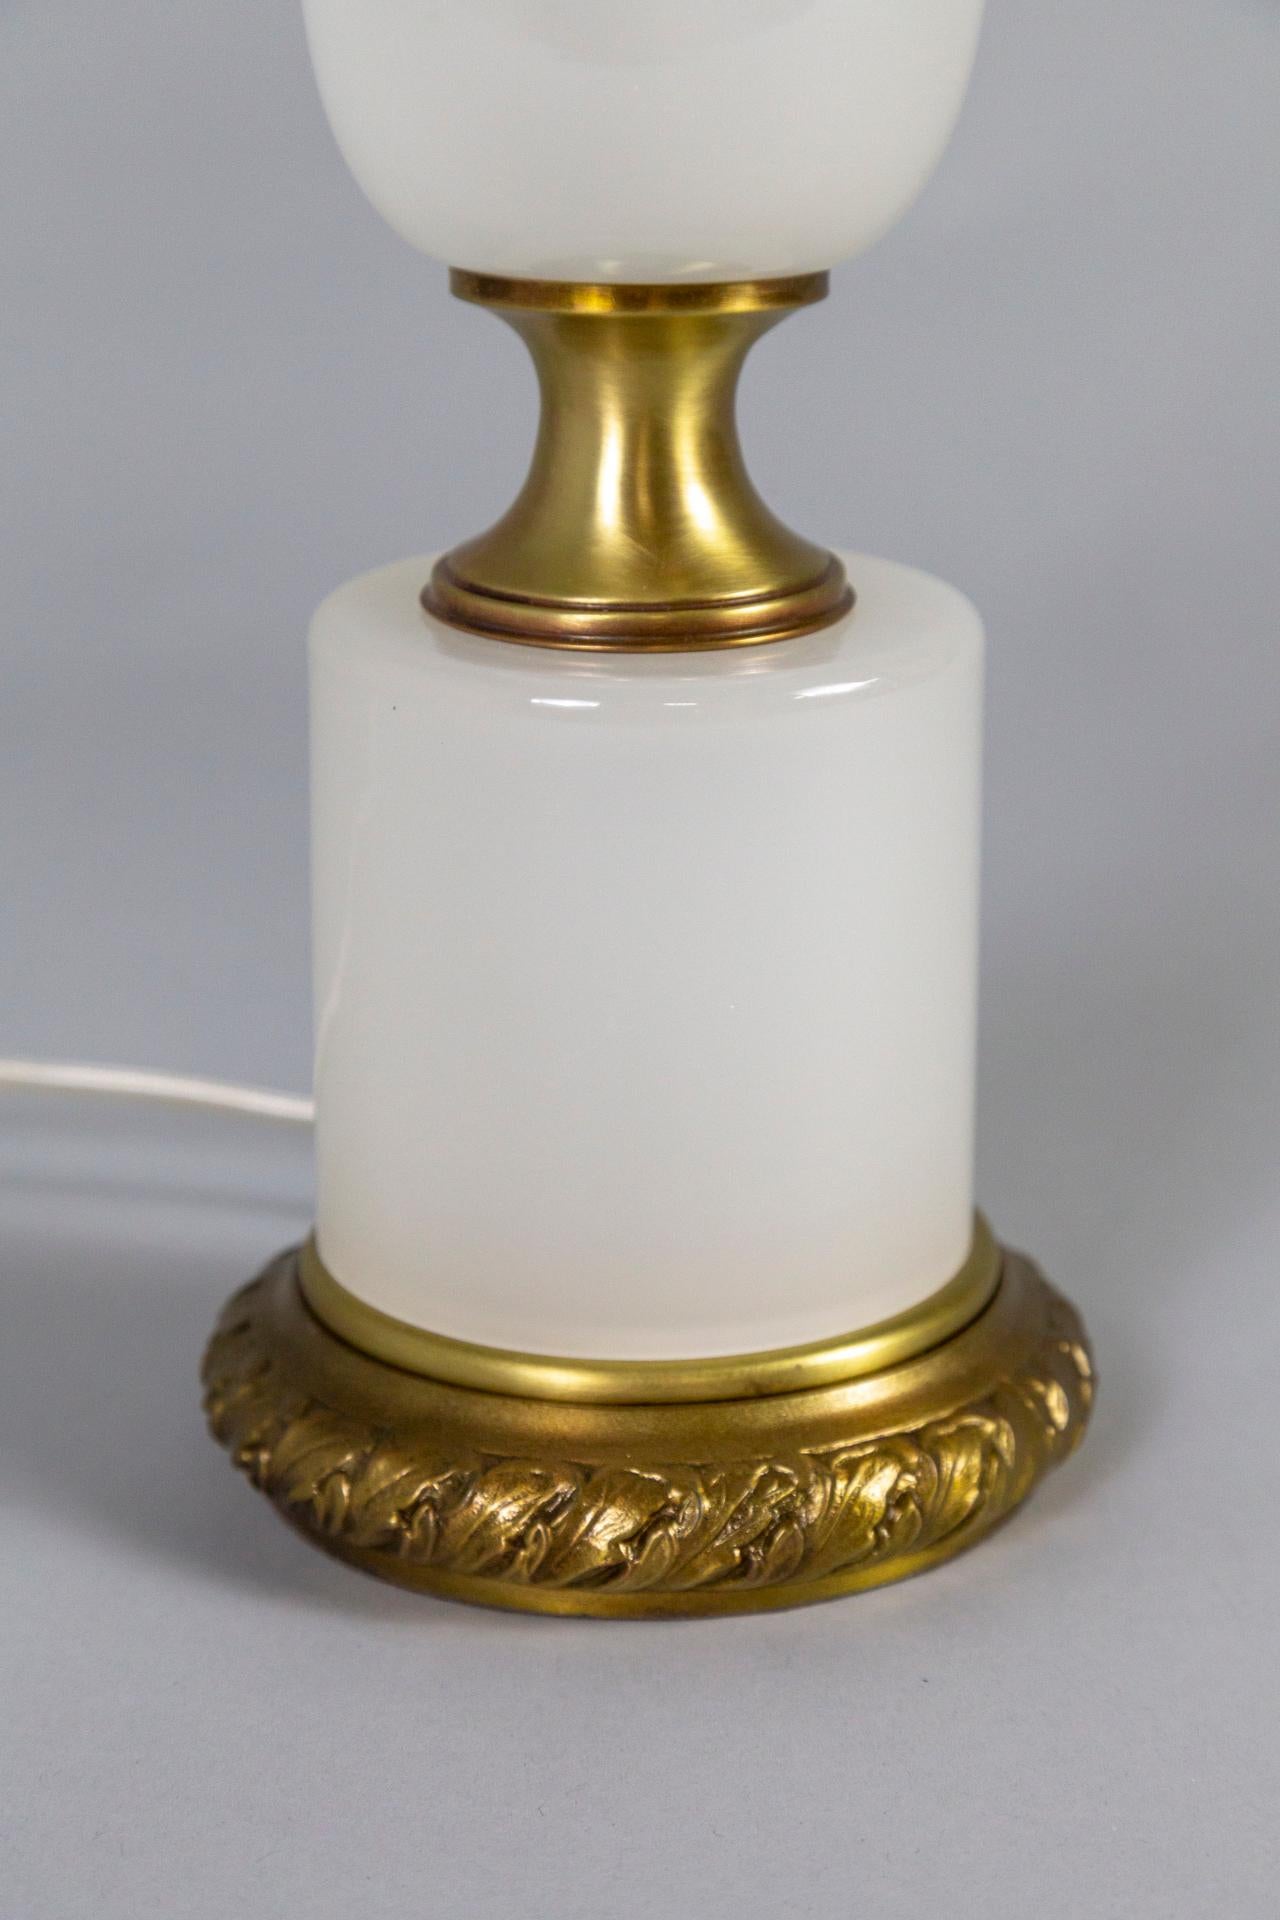 A table lamp with opaline glass that has a complex, almost smoke-like appearance. It has an elegant shape with brass accents- a base with cast acanthus leaf details. Made by Frederick Cooper design in the 1950s. Newly wired with a dimmer on the